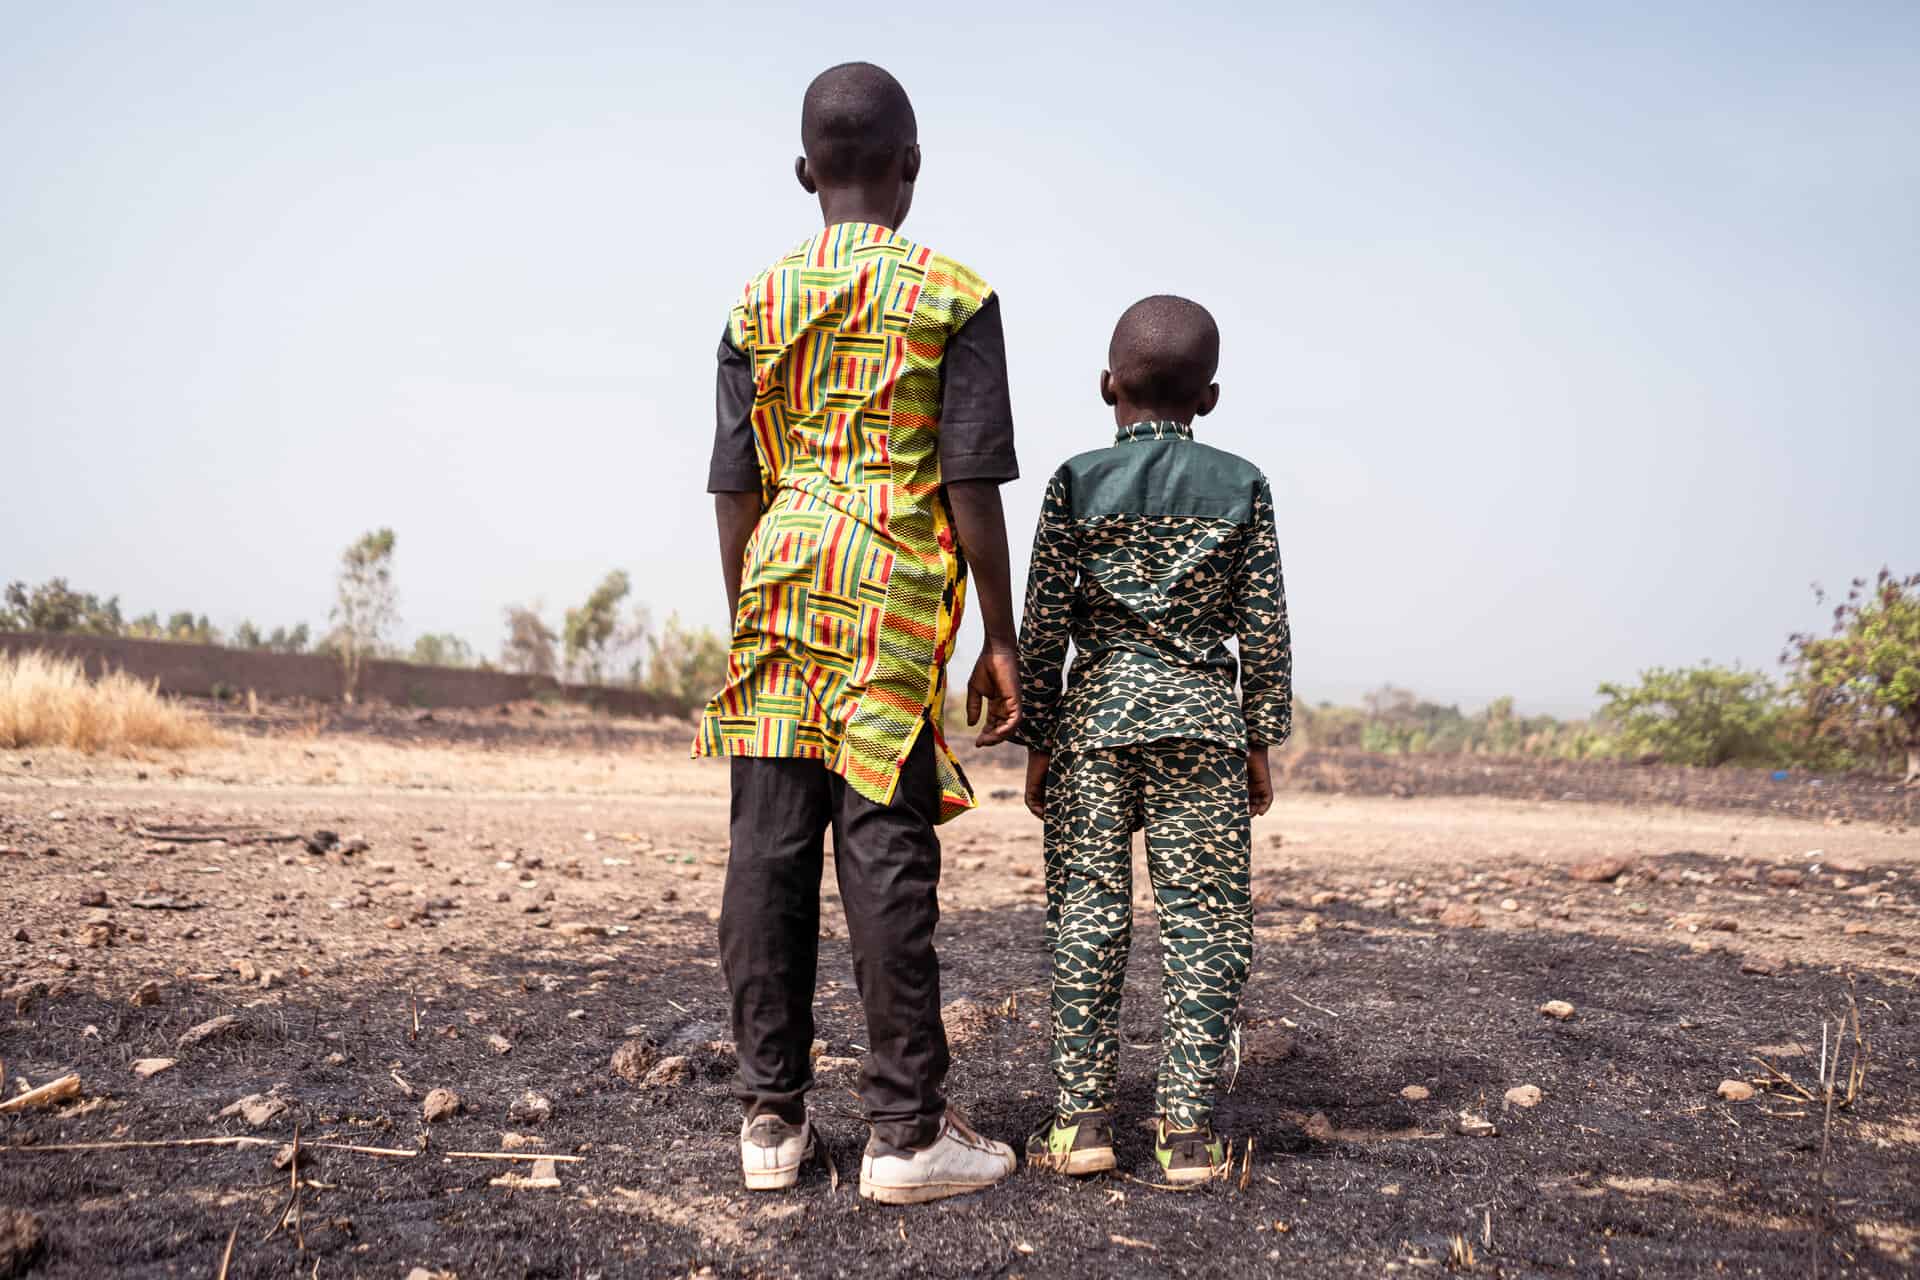 Two African children stand desperately in front of a burnt wheat field, a symbol of the climate crisis and global warming.